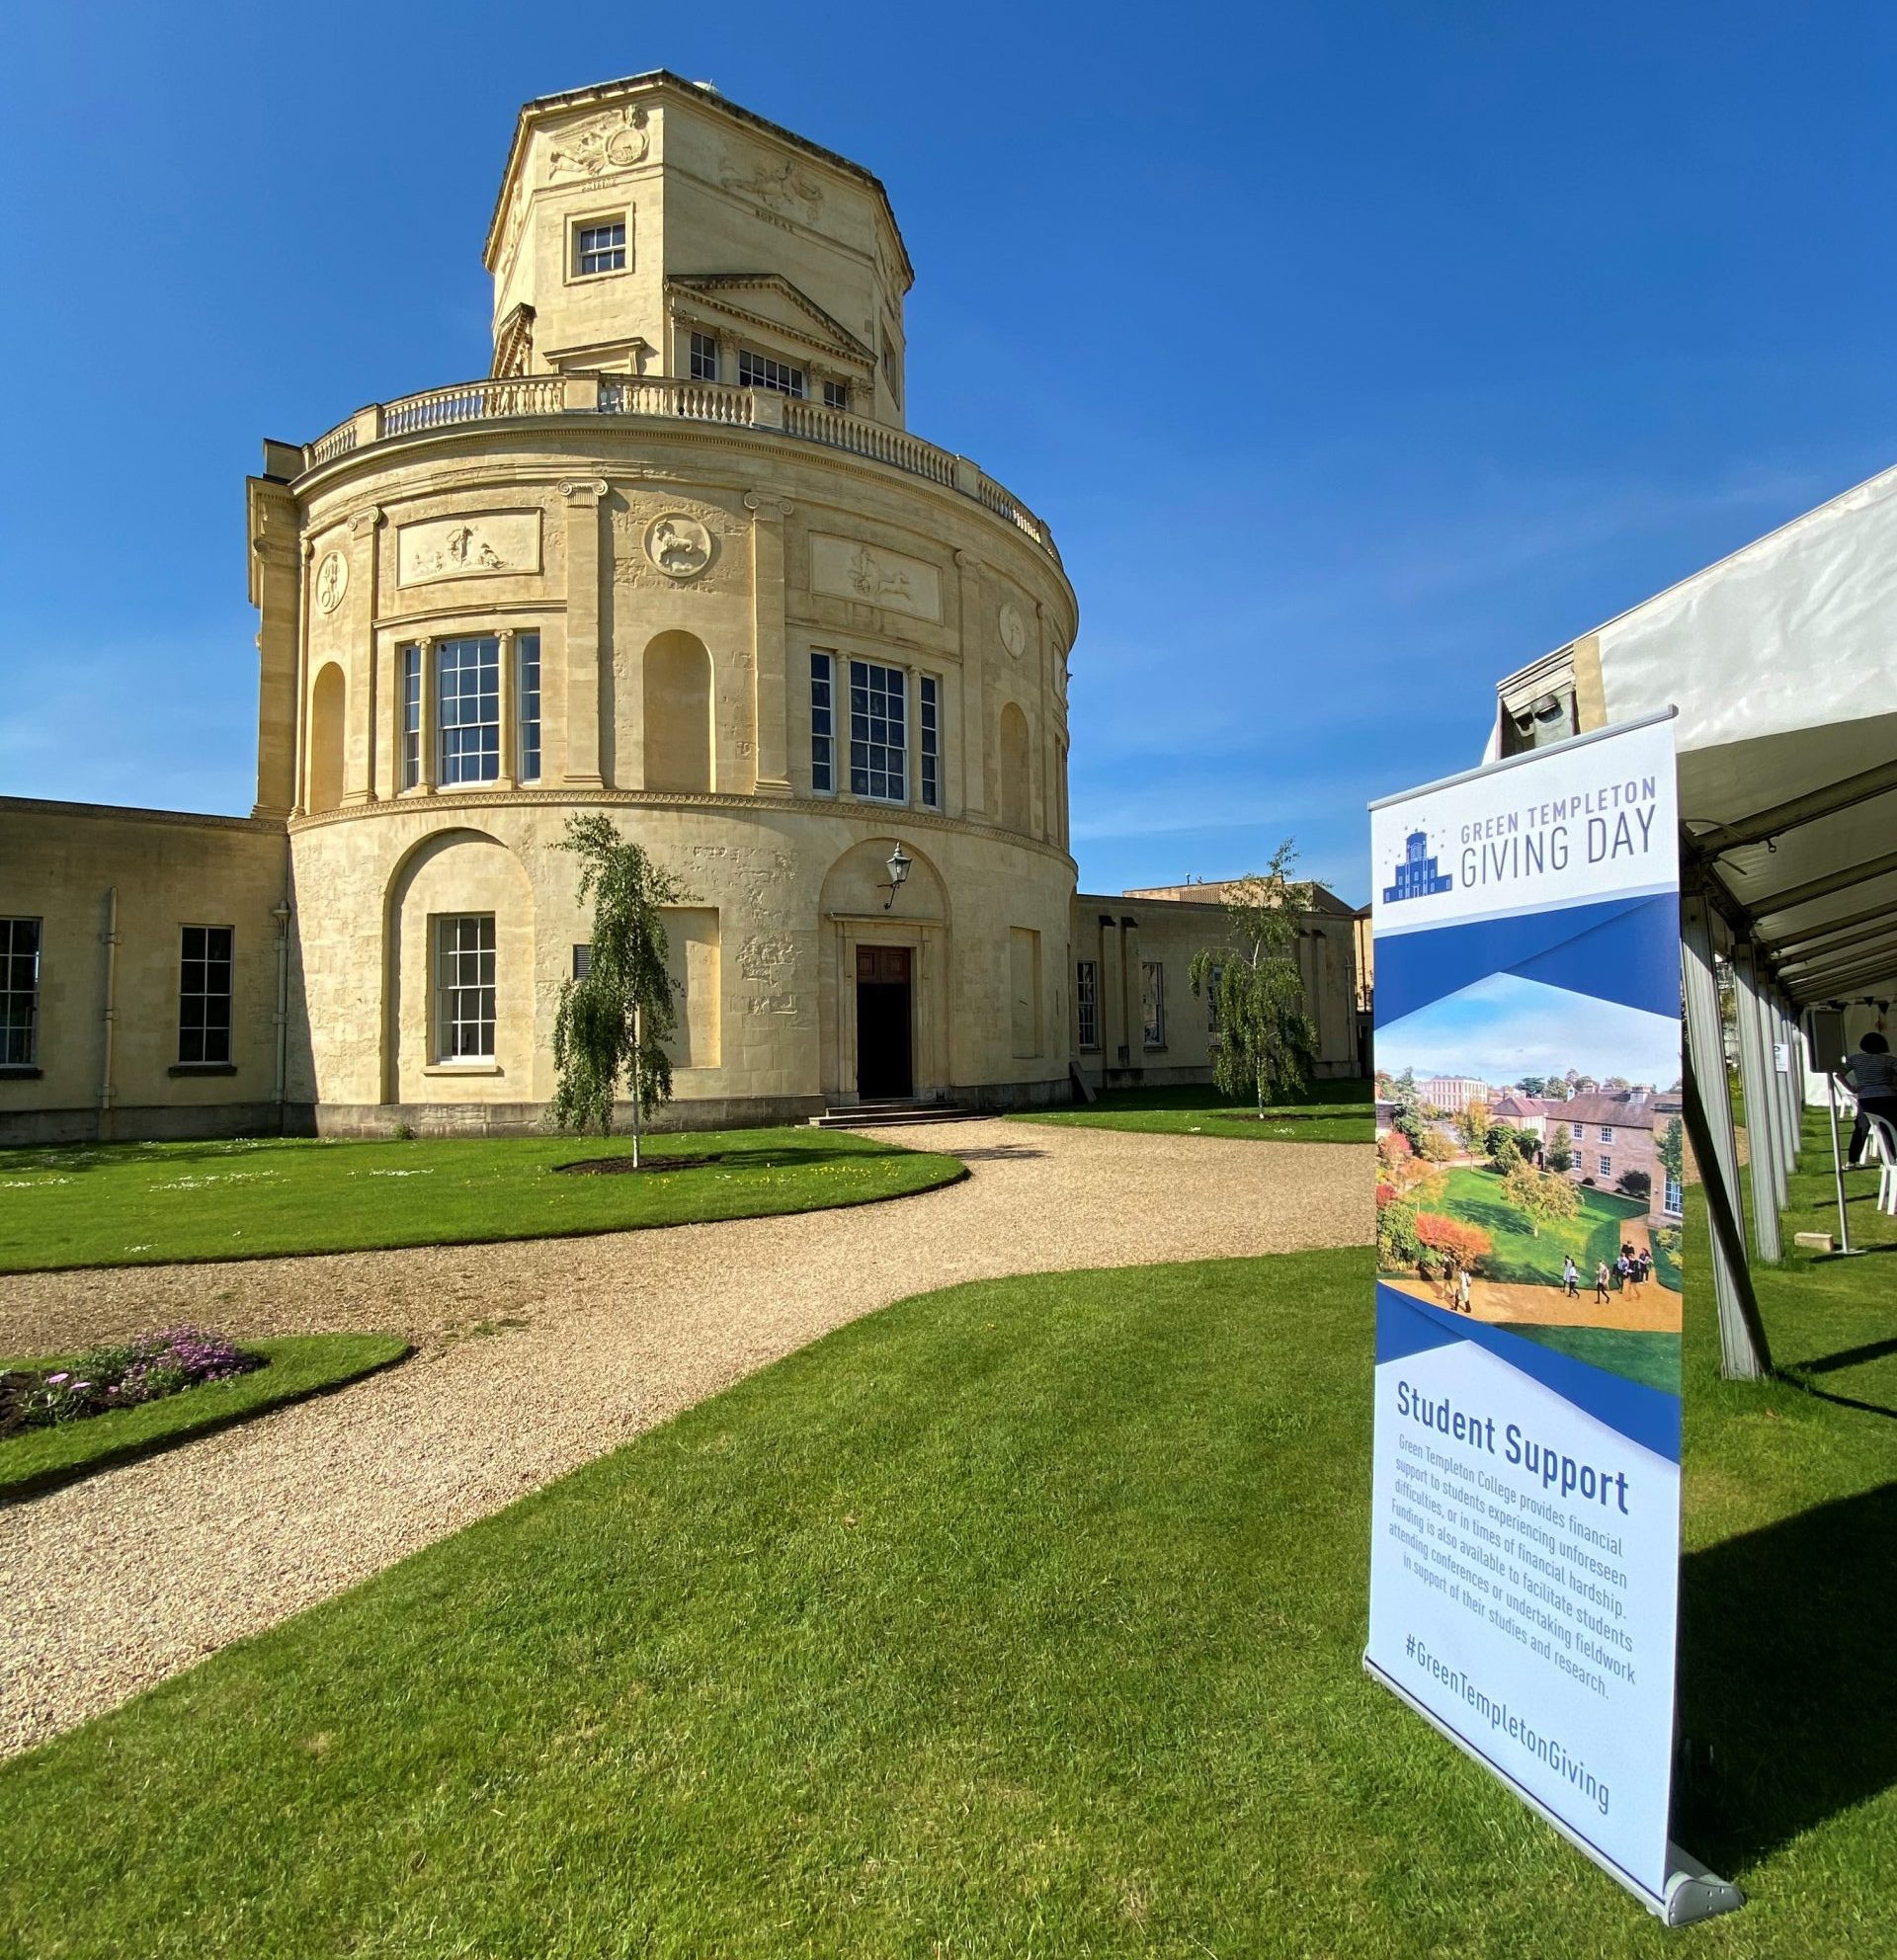 A banner displaying the words 'Green Templeton Giving Day' and 'Student Support' hangs in front of the Radcliffe Observatory